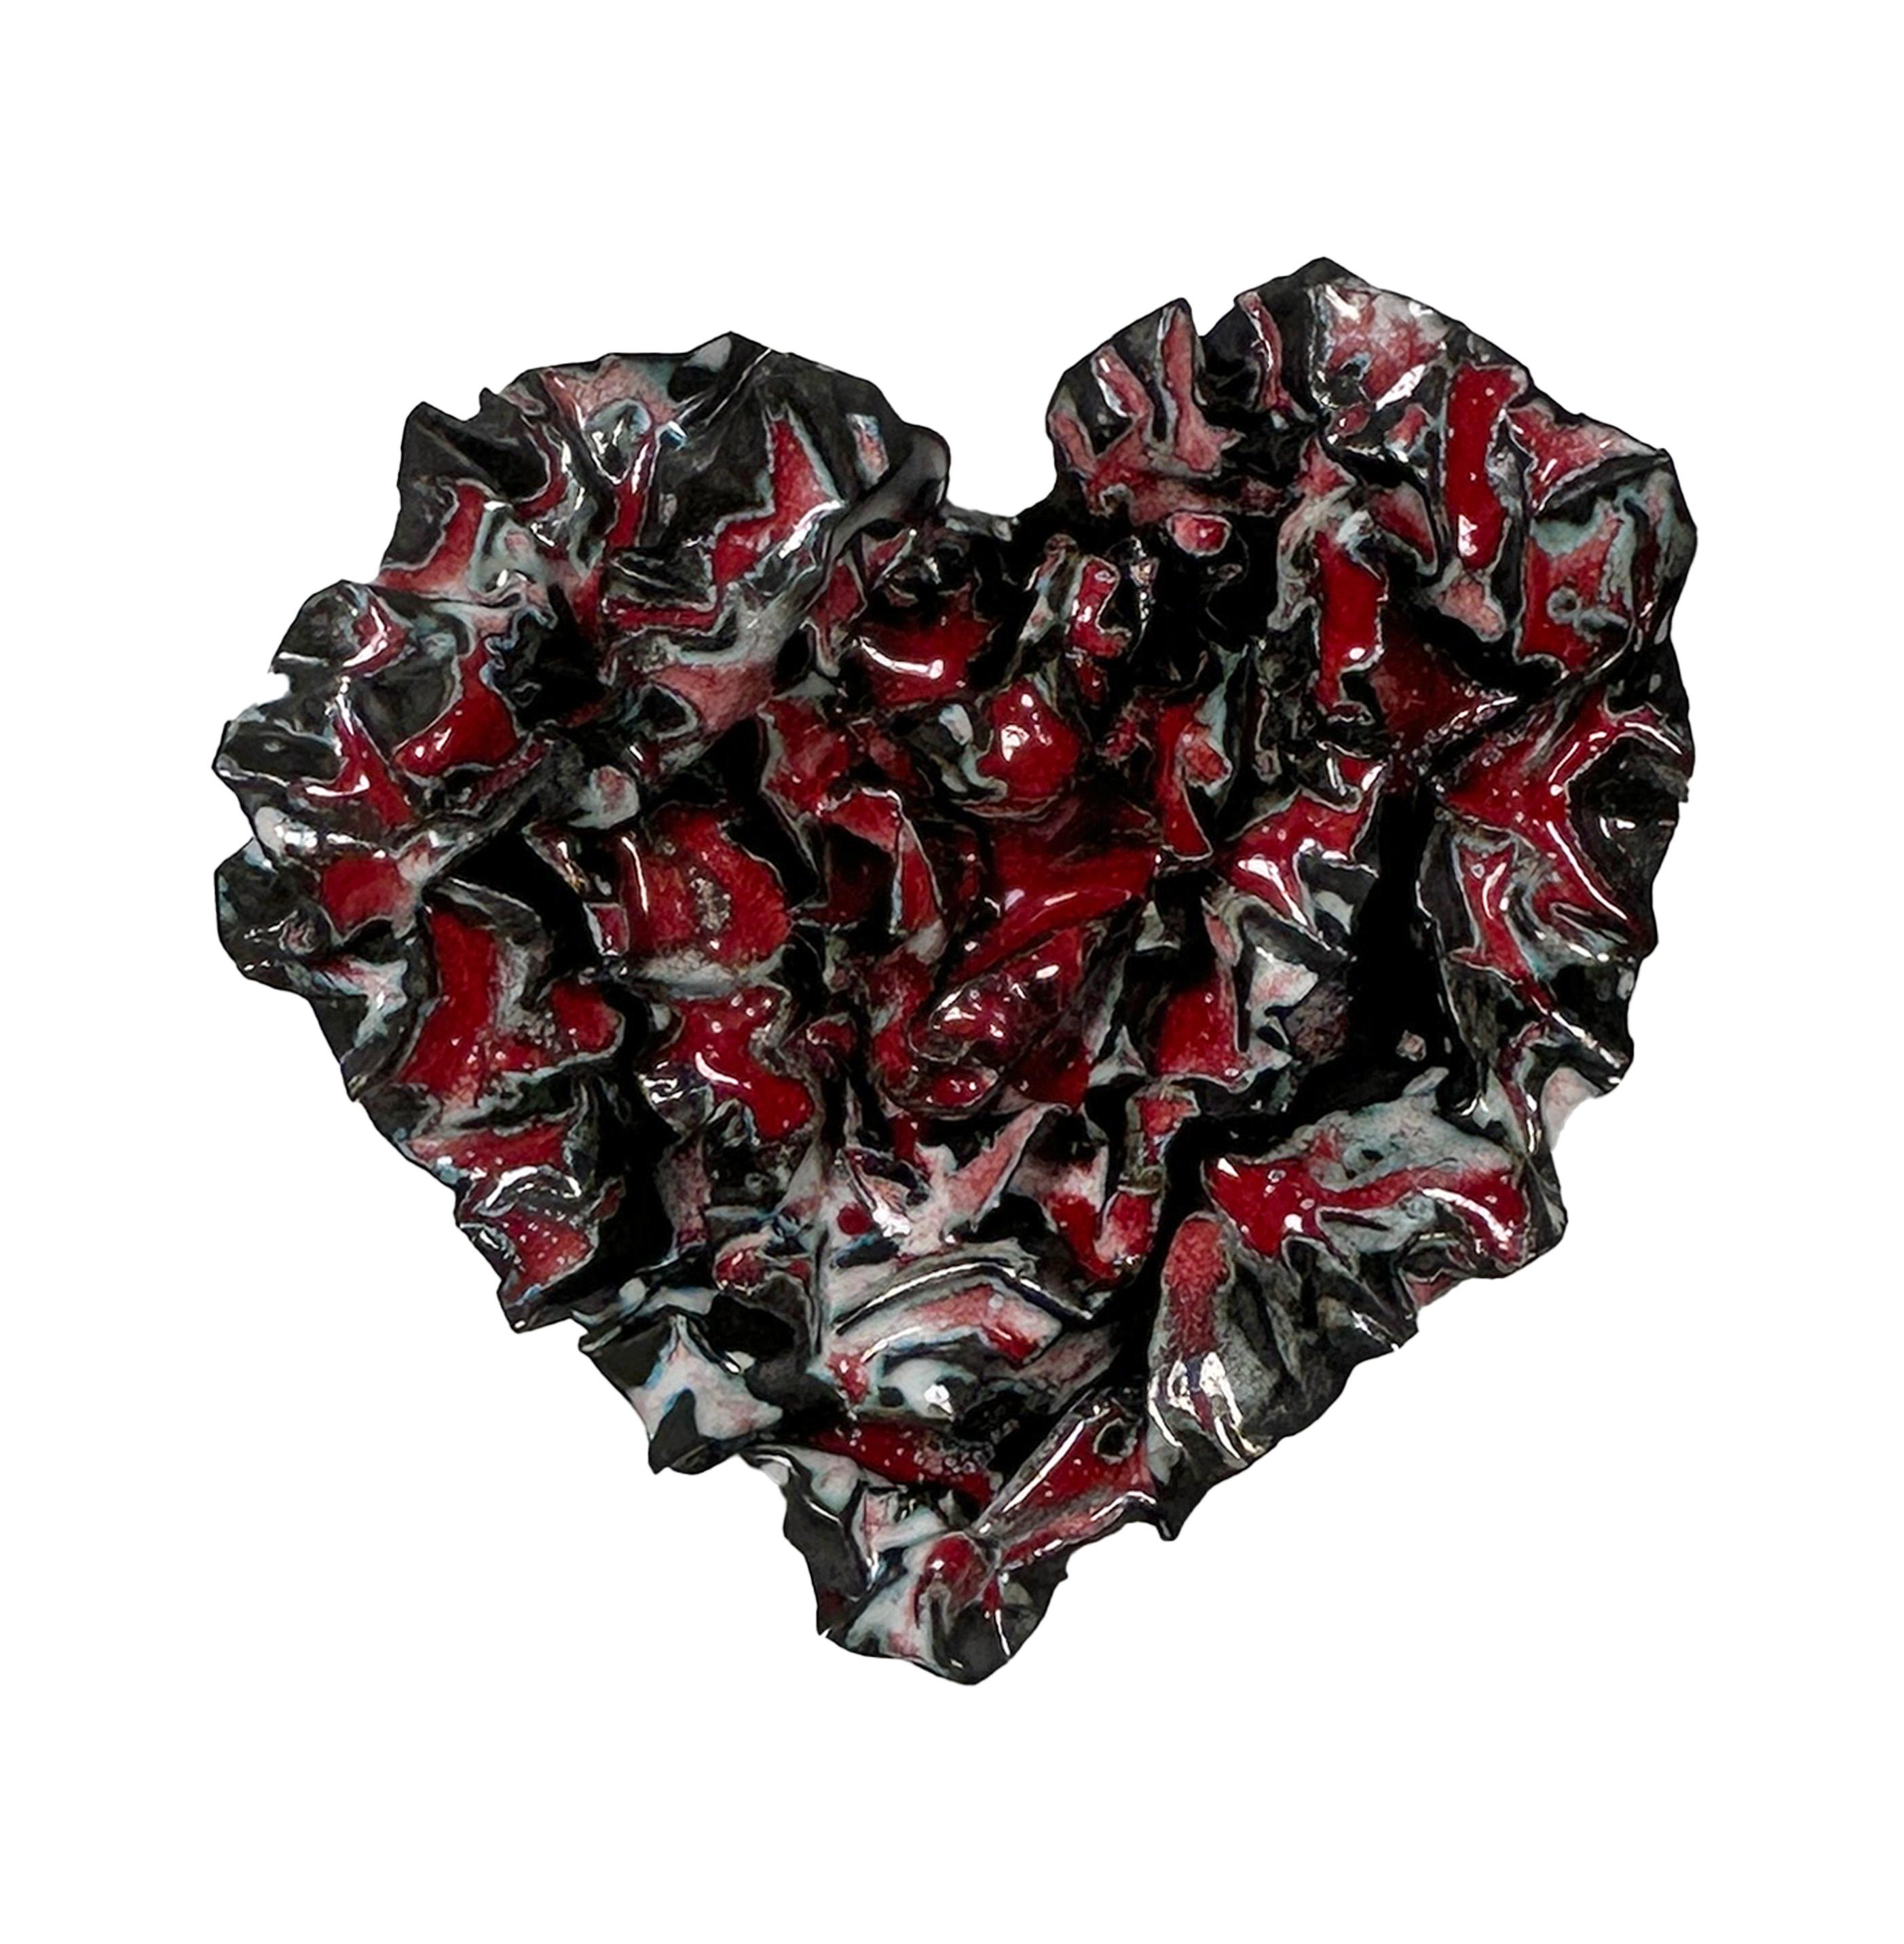 Ribbons of Red, is an abstract heart enameled sculpture that pulsates with vibrant energy and dynamic hues. This striking piece features a captivating interplay of red, black, and white, with red commanding attention as the dominant color, swirling